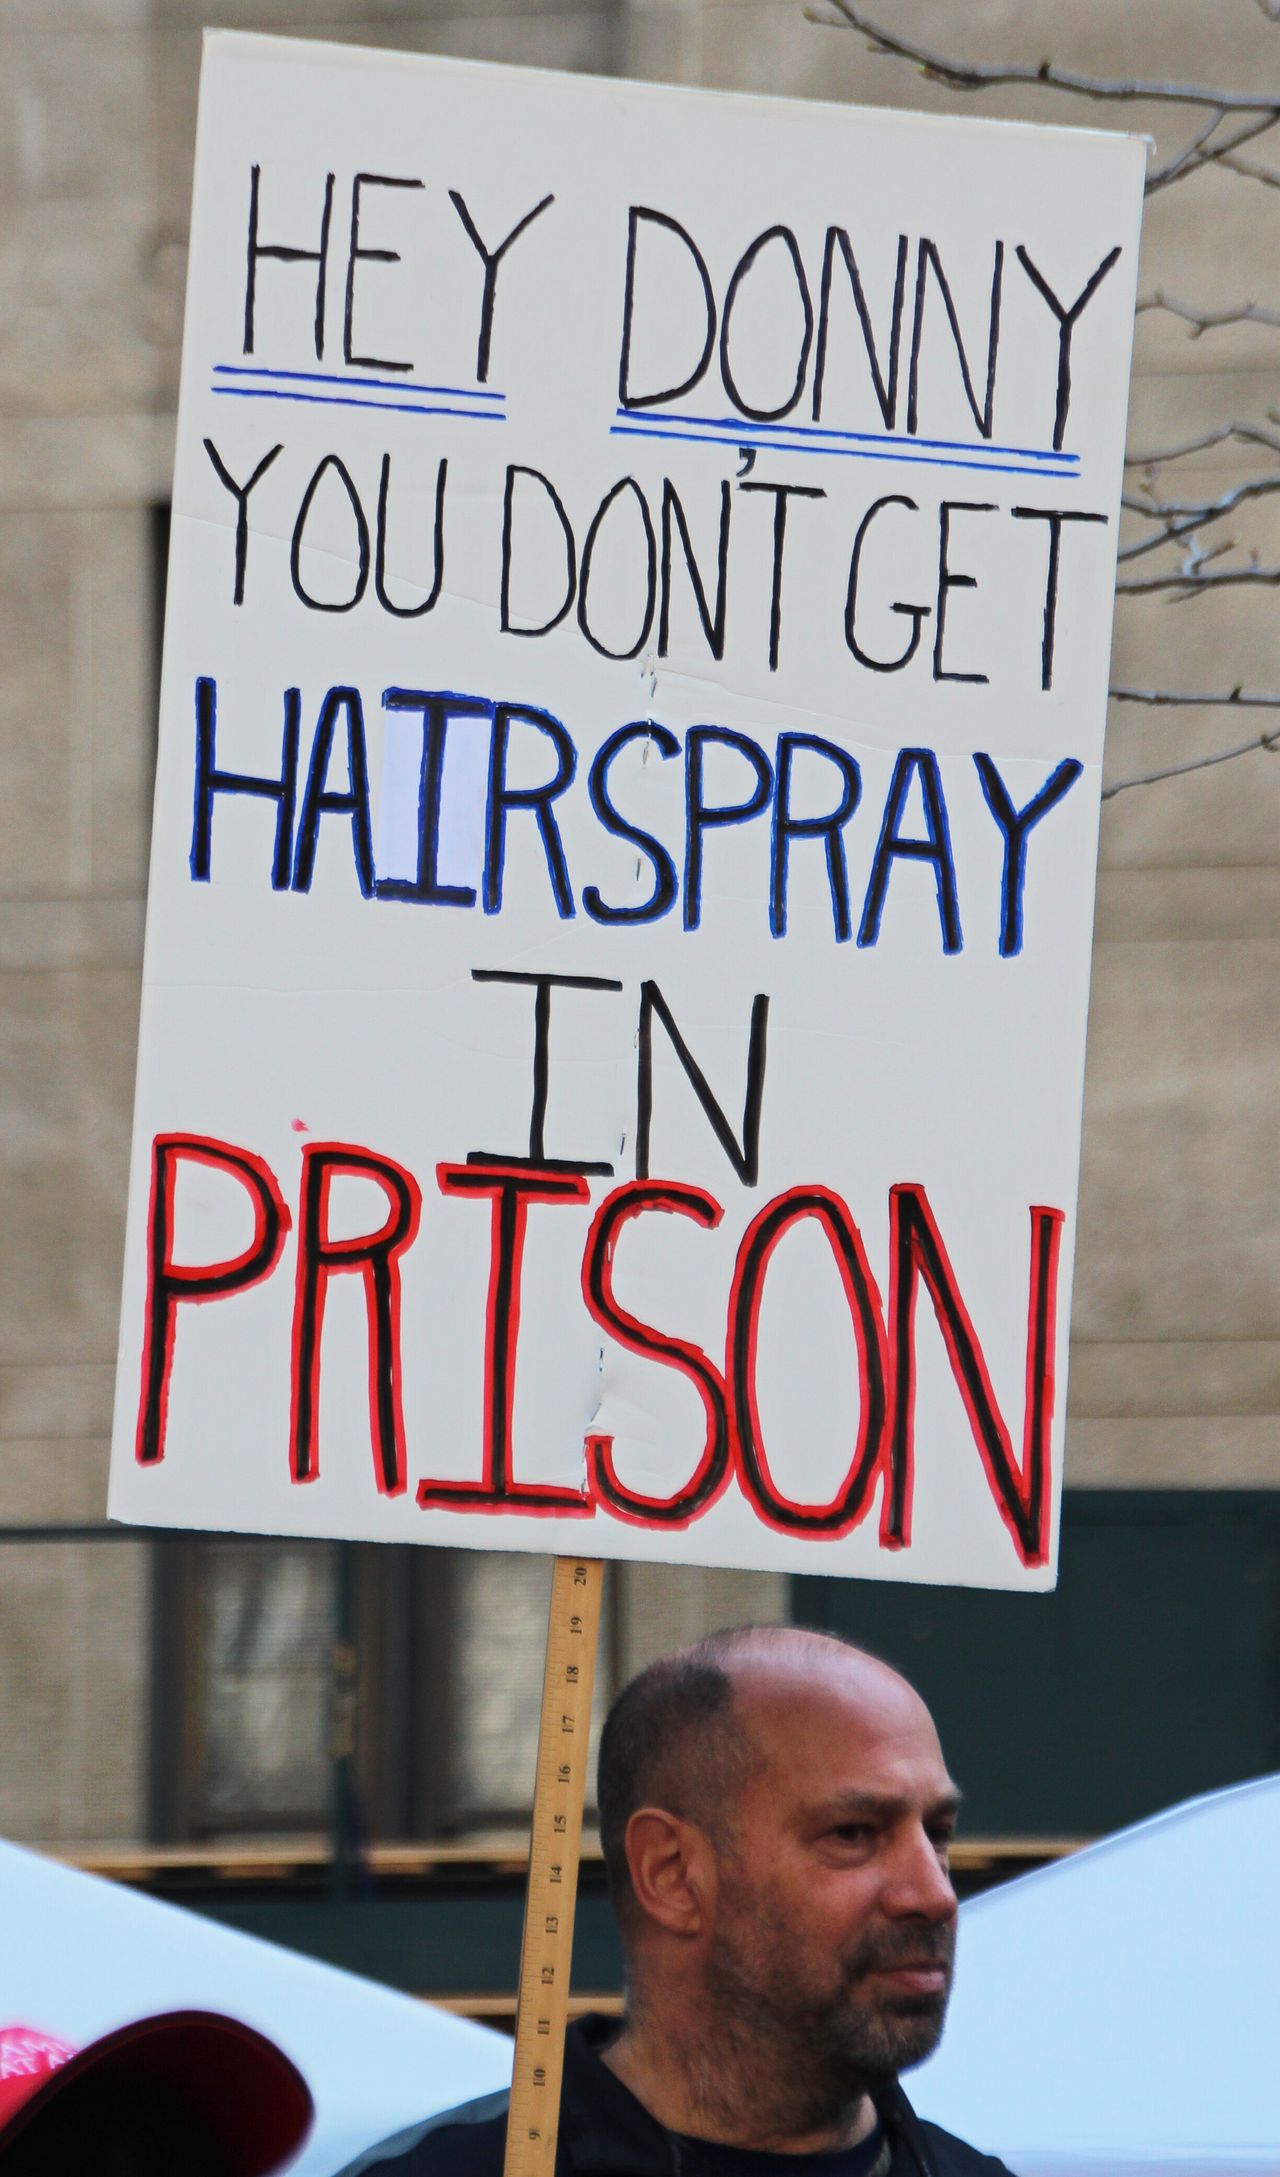 A protester holds a sign reading "Hey Donny, you don't get hairspray in prison" in Collect Pond Park across the street from the Manhattan District Attorney's office.